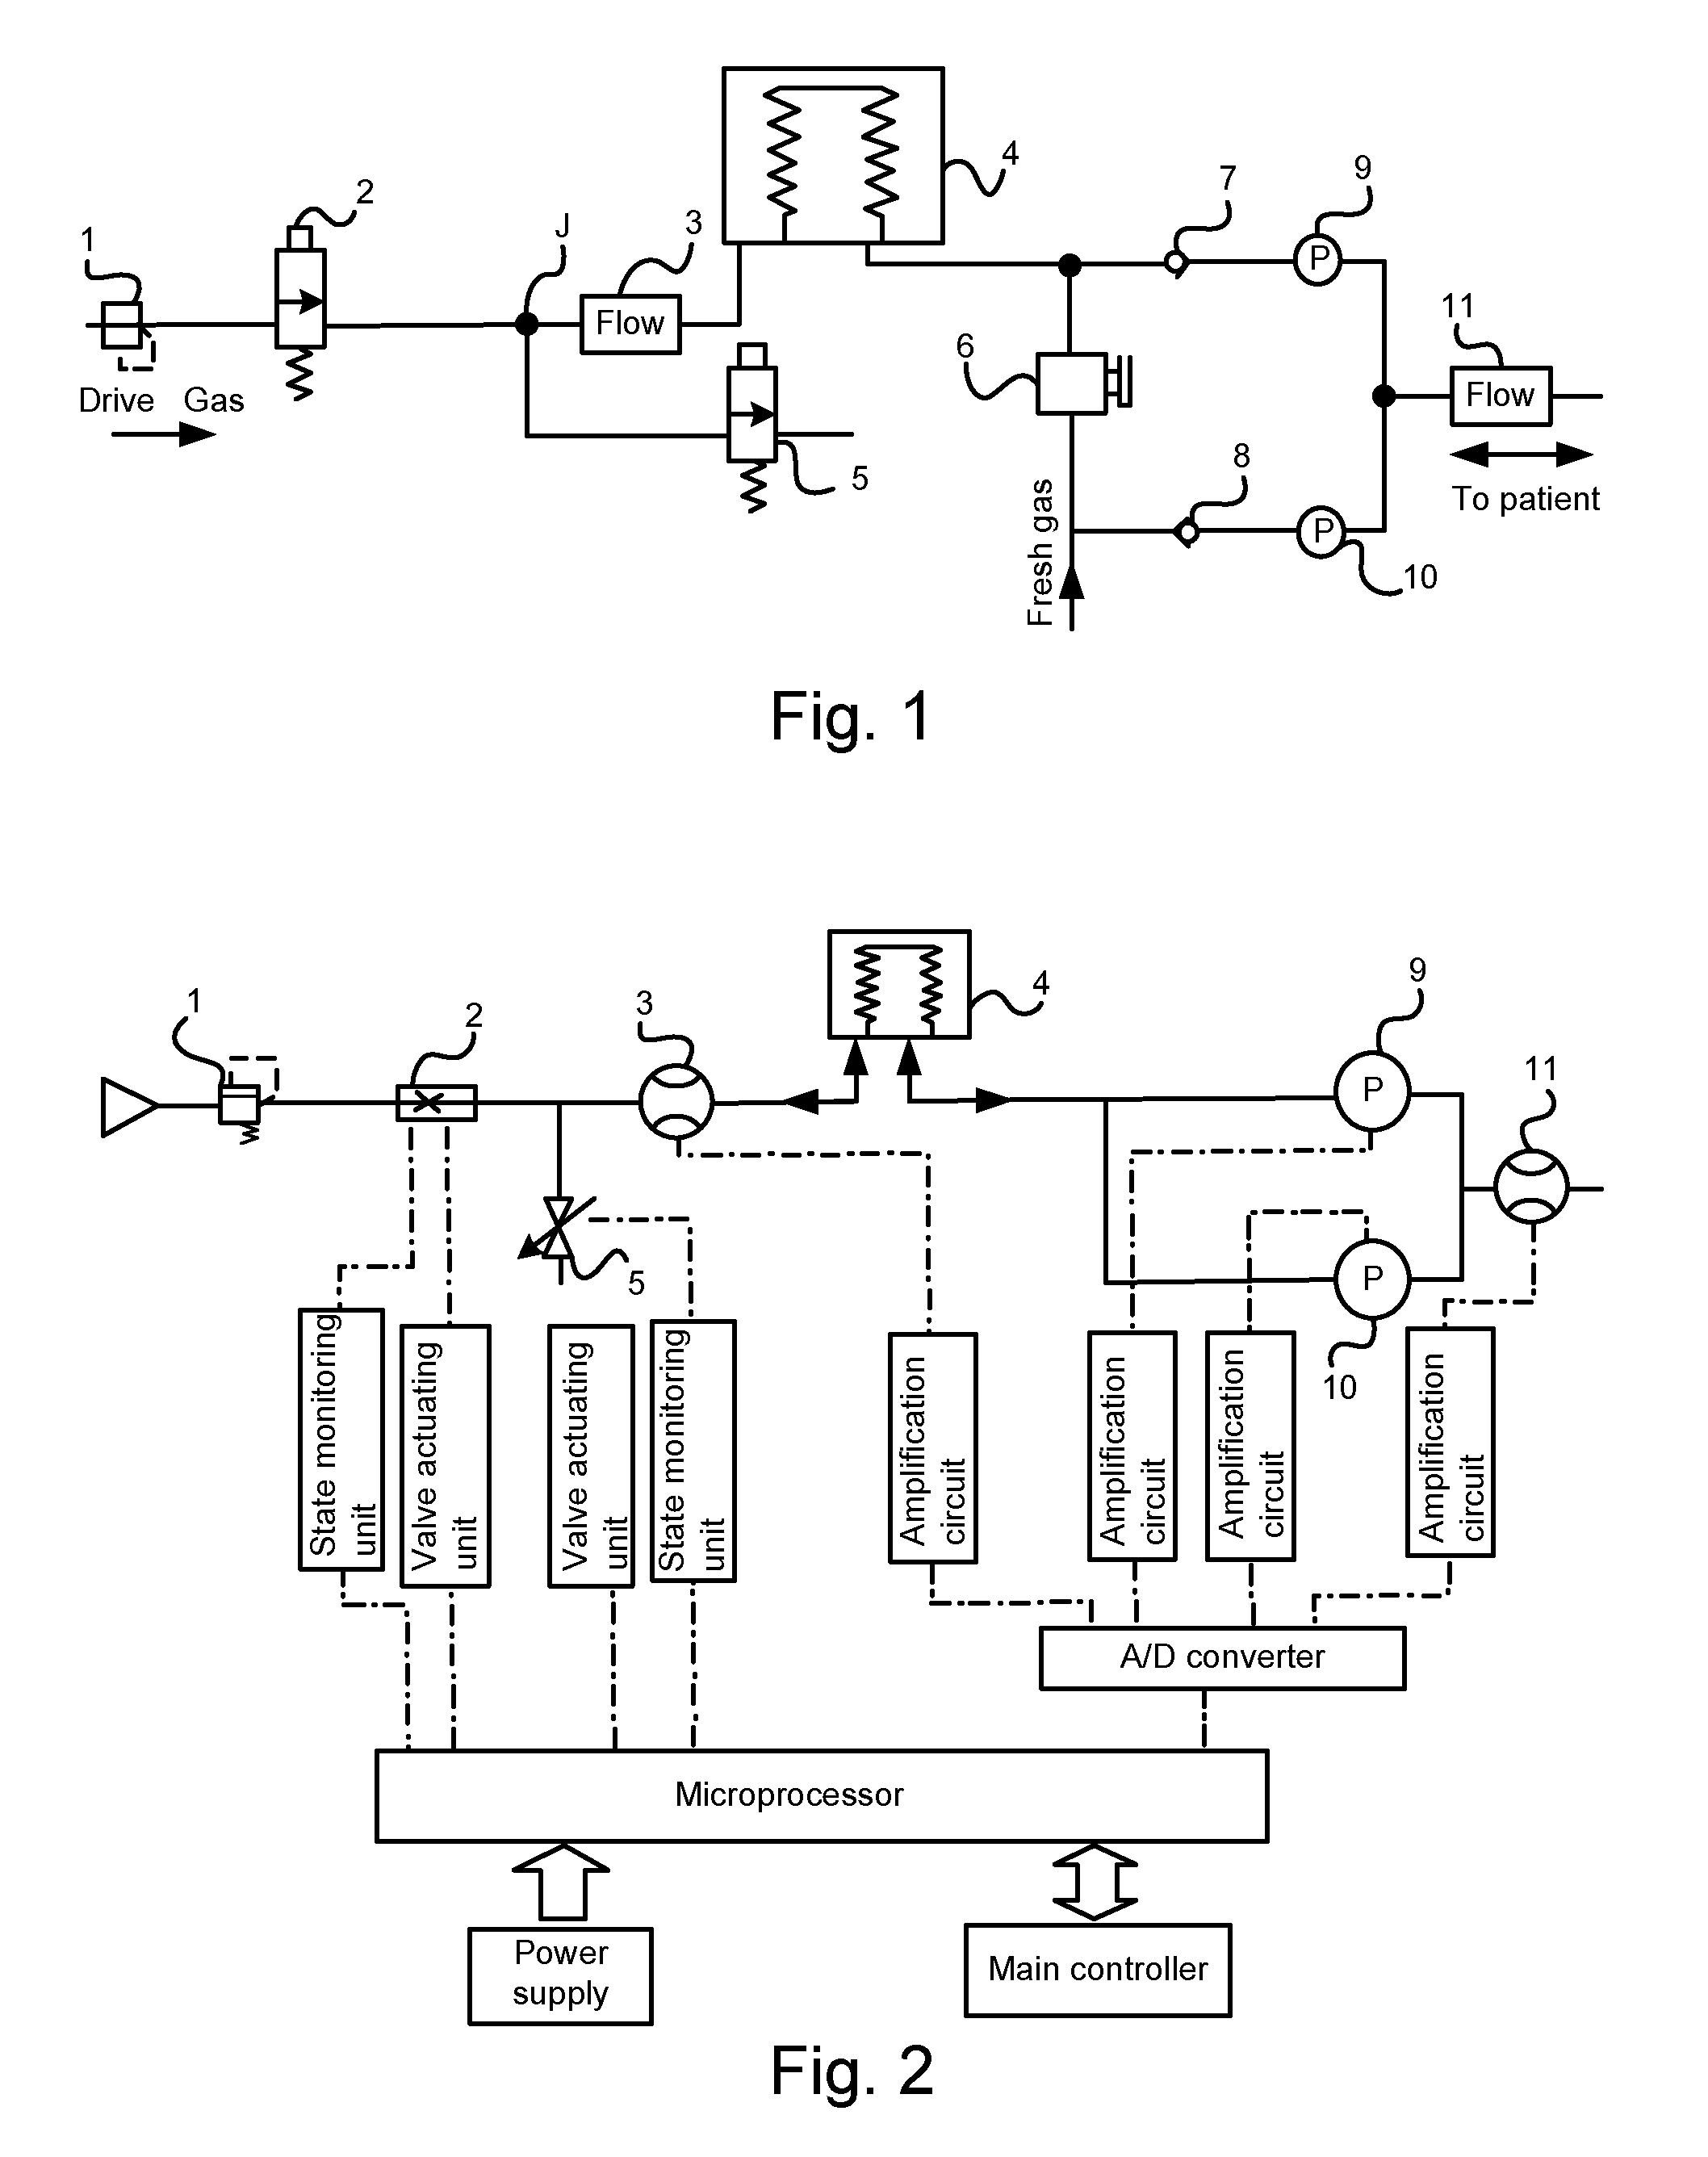 Method and an apparatus for monitoring and controlling flows